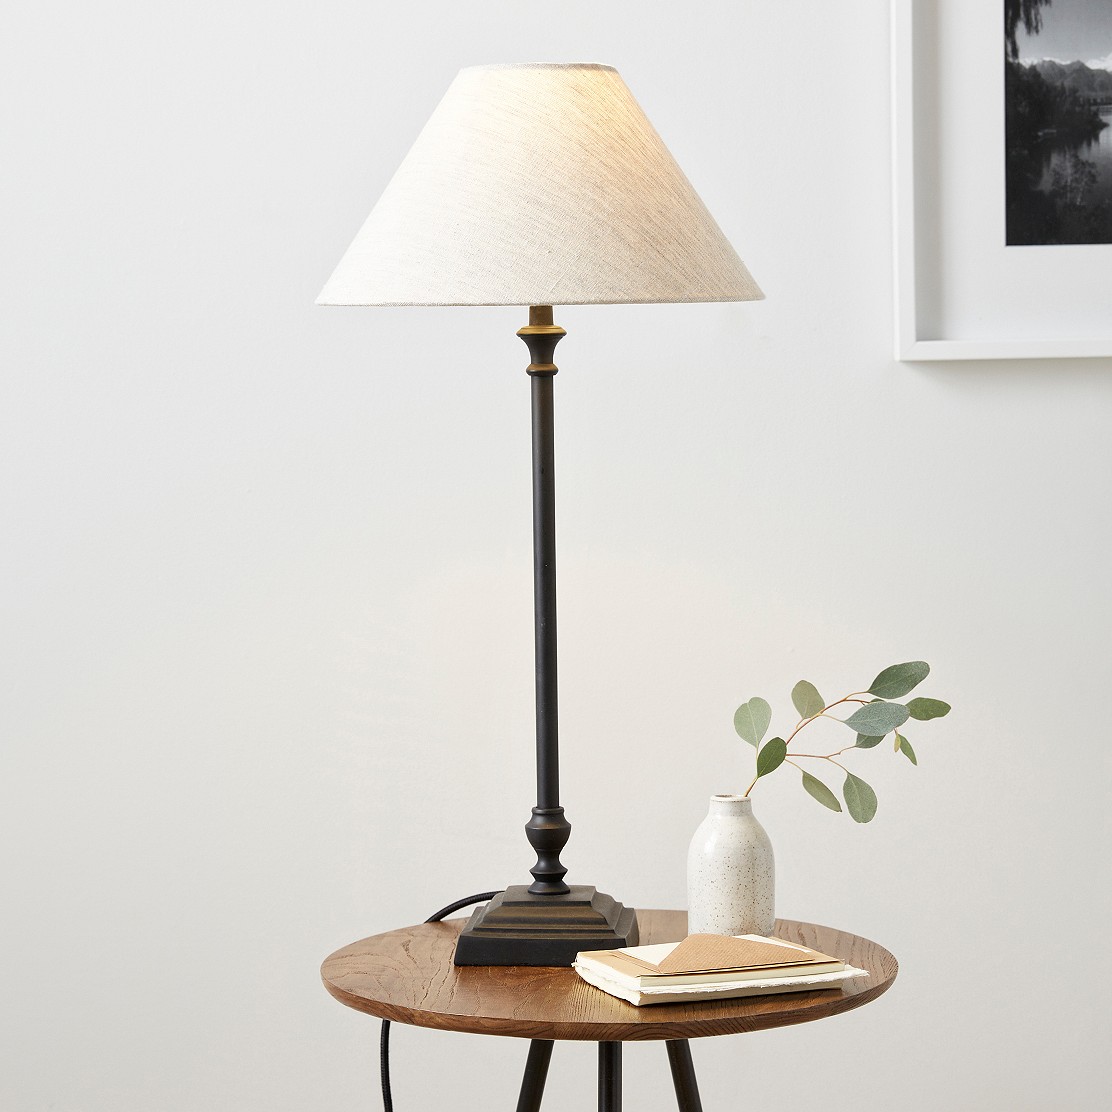 Cowley Table Lamp Lighting The, Tall Slim Table Lamps Uk